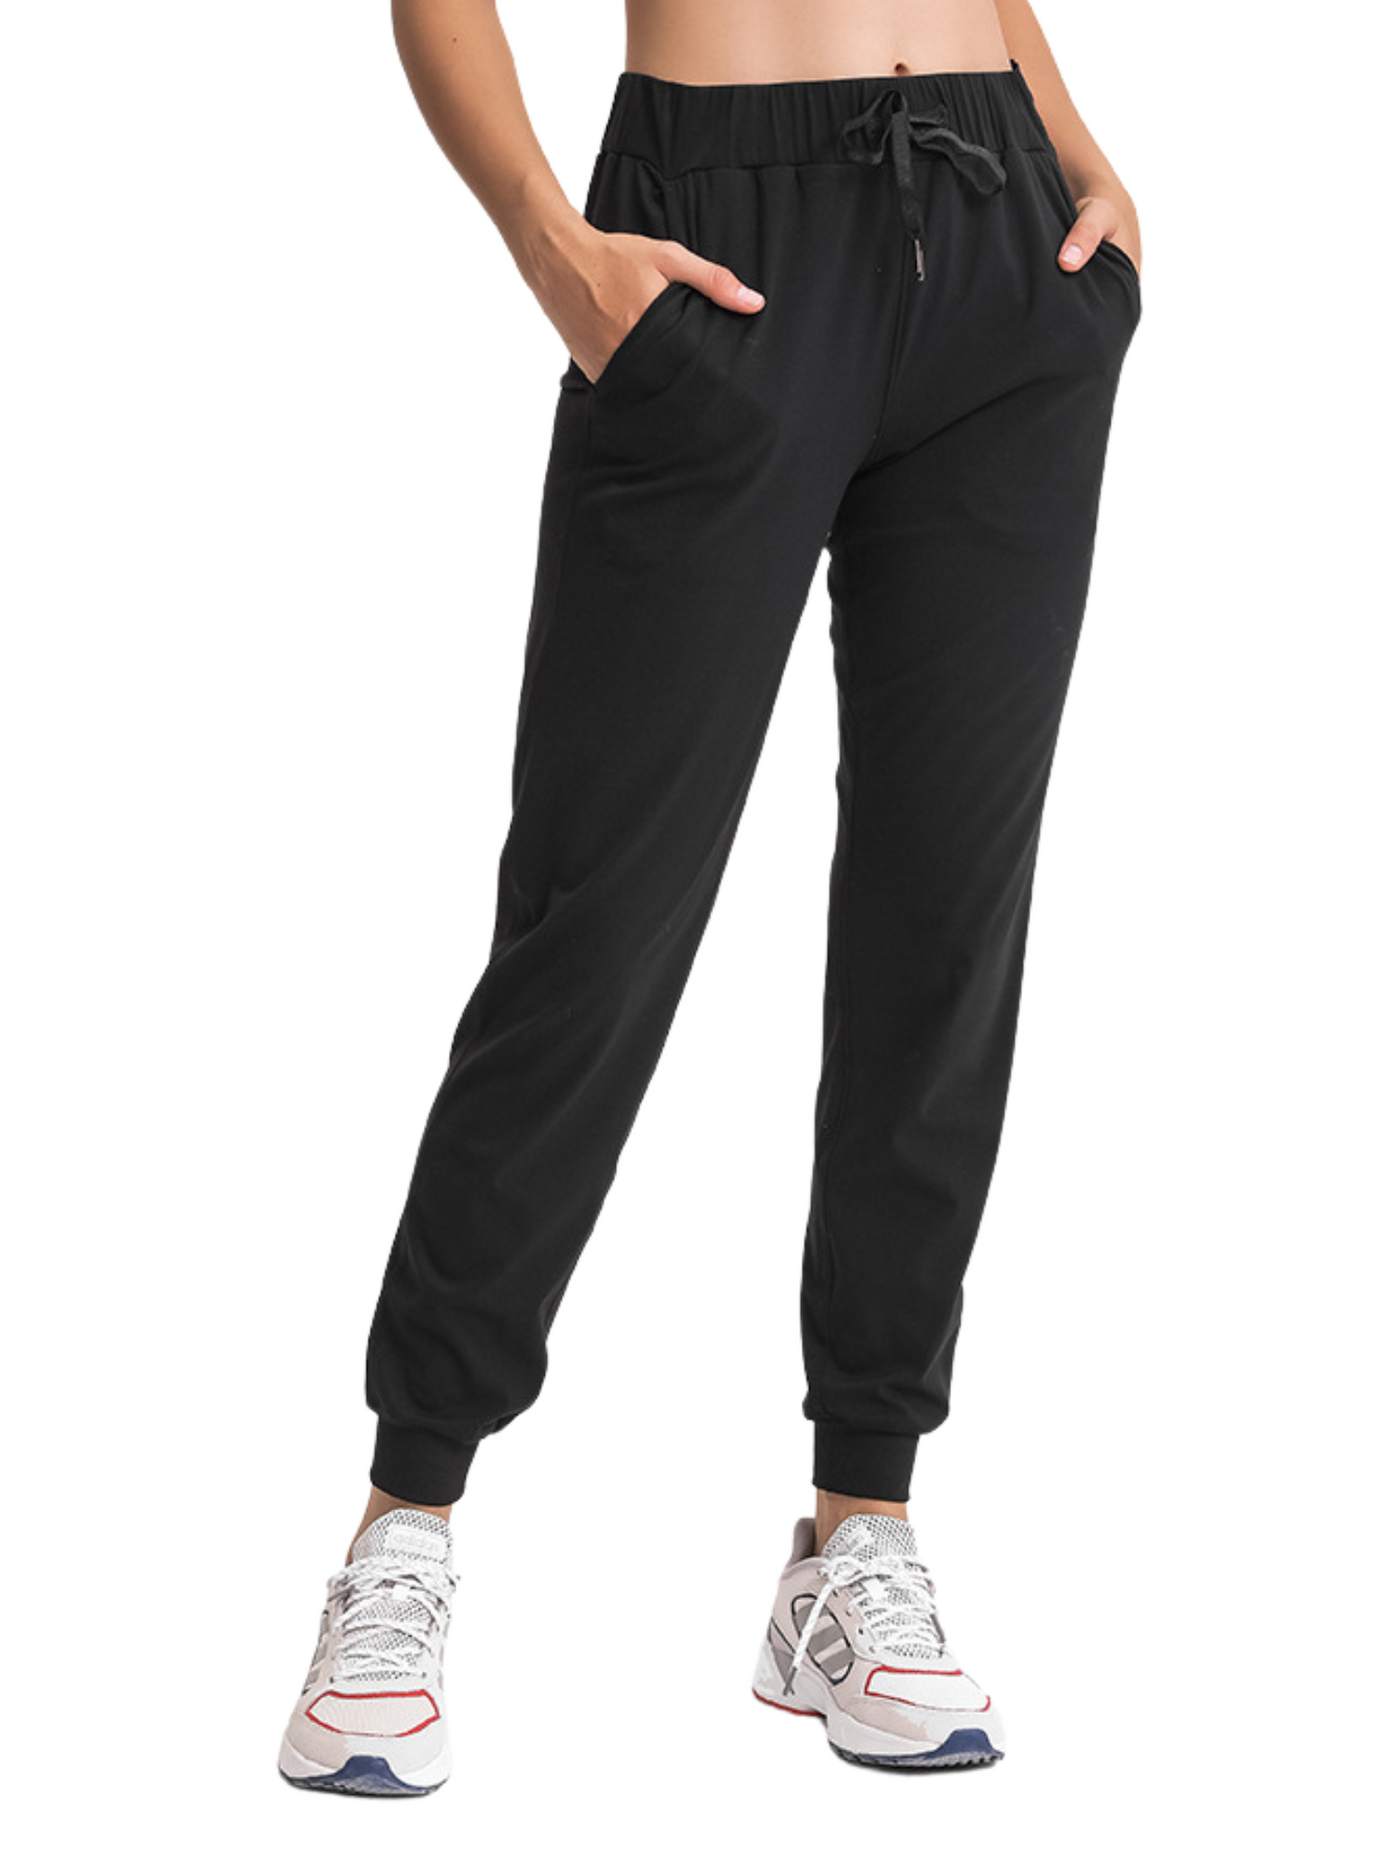 Navalora Fit Black Everyday Joggers Side Pocket View